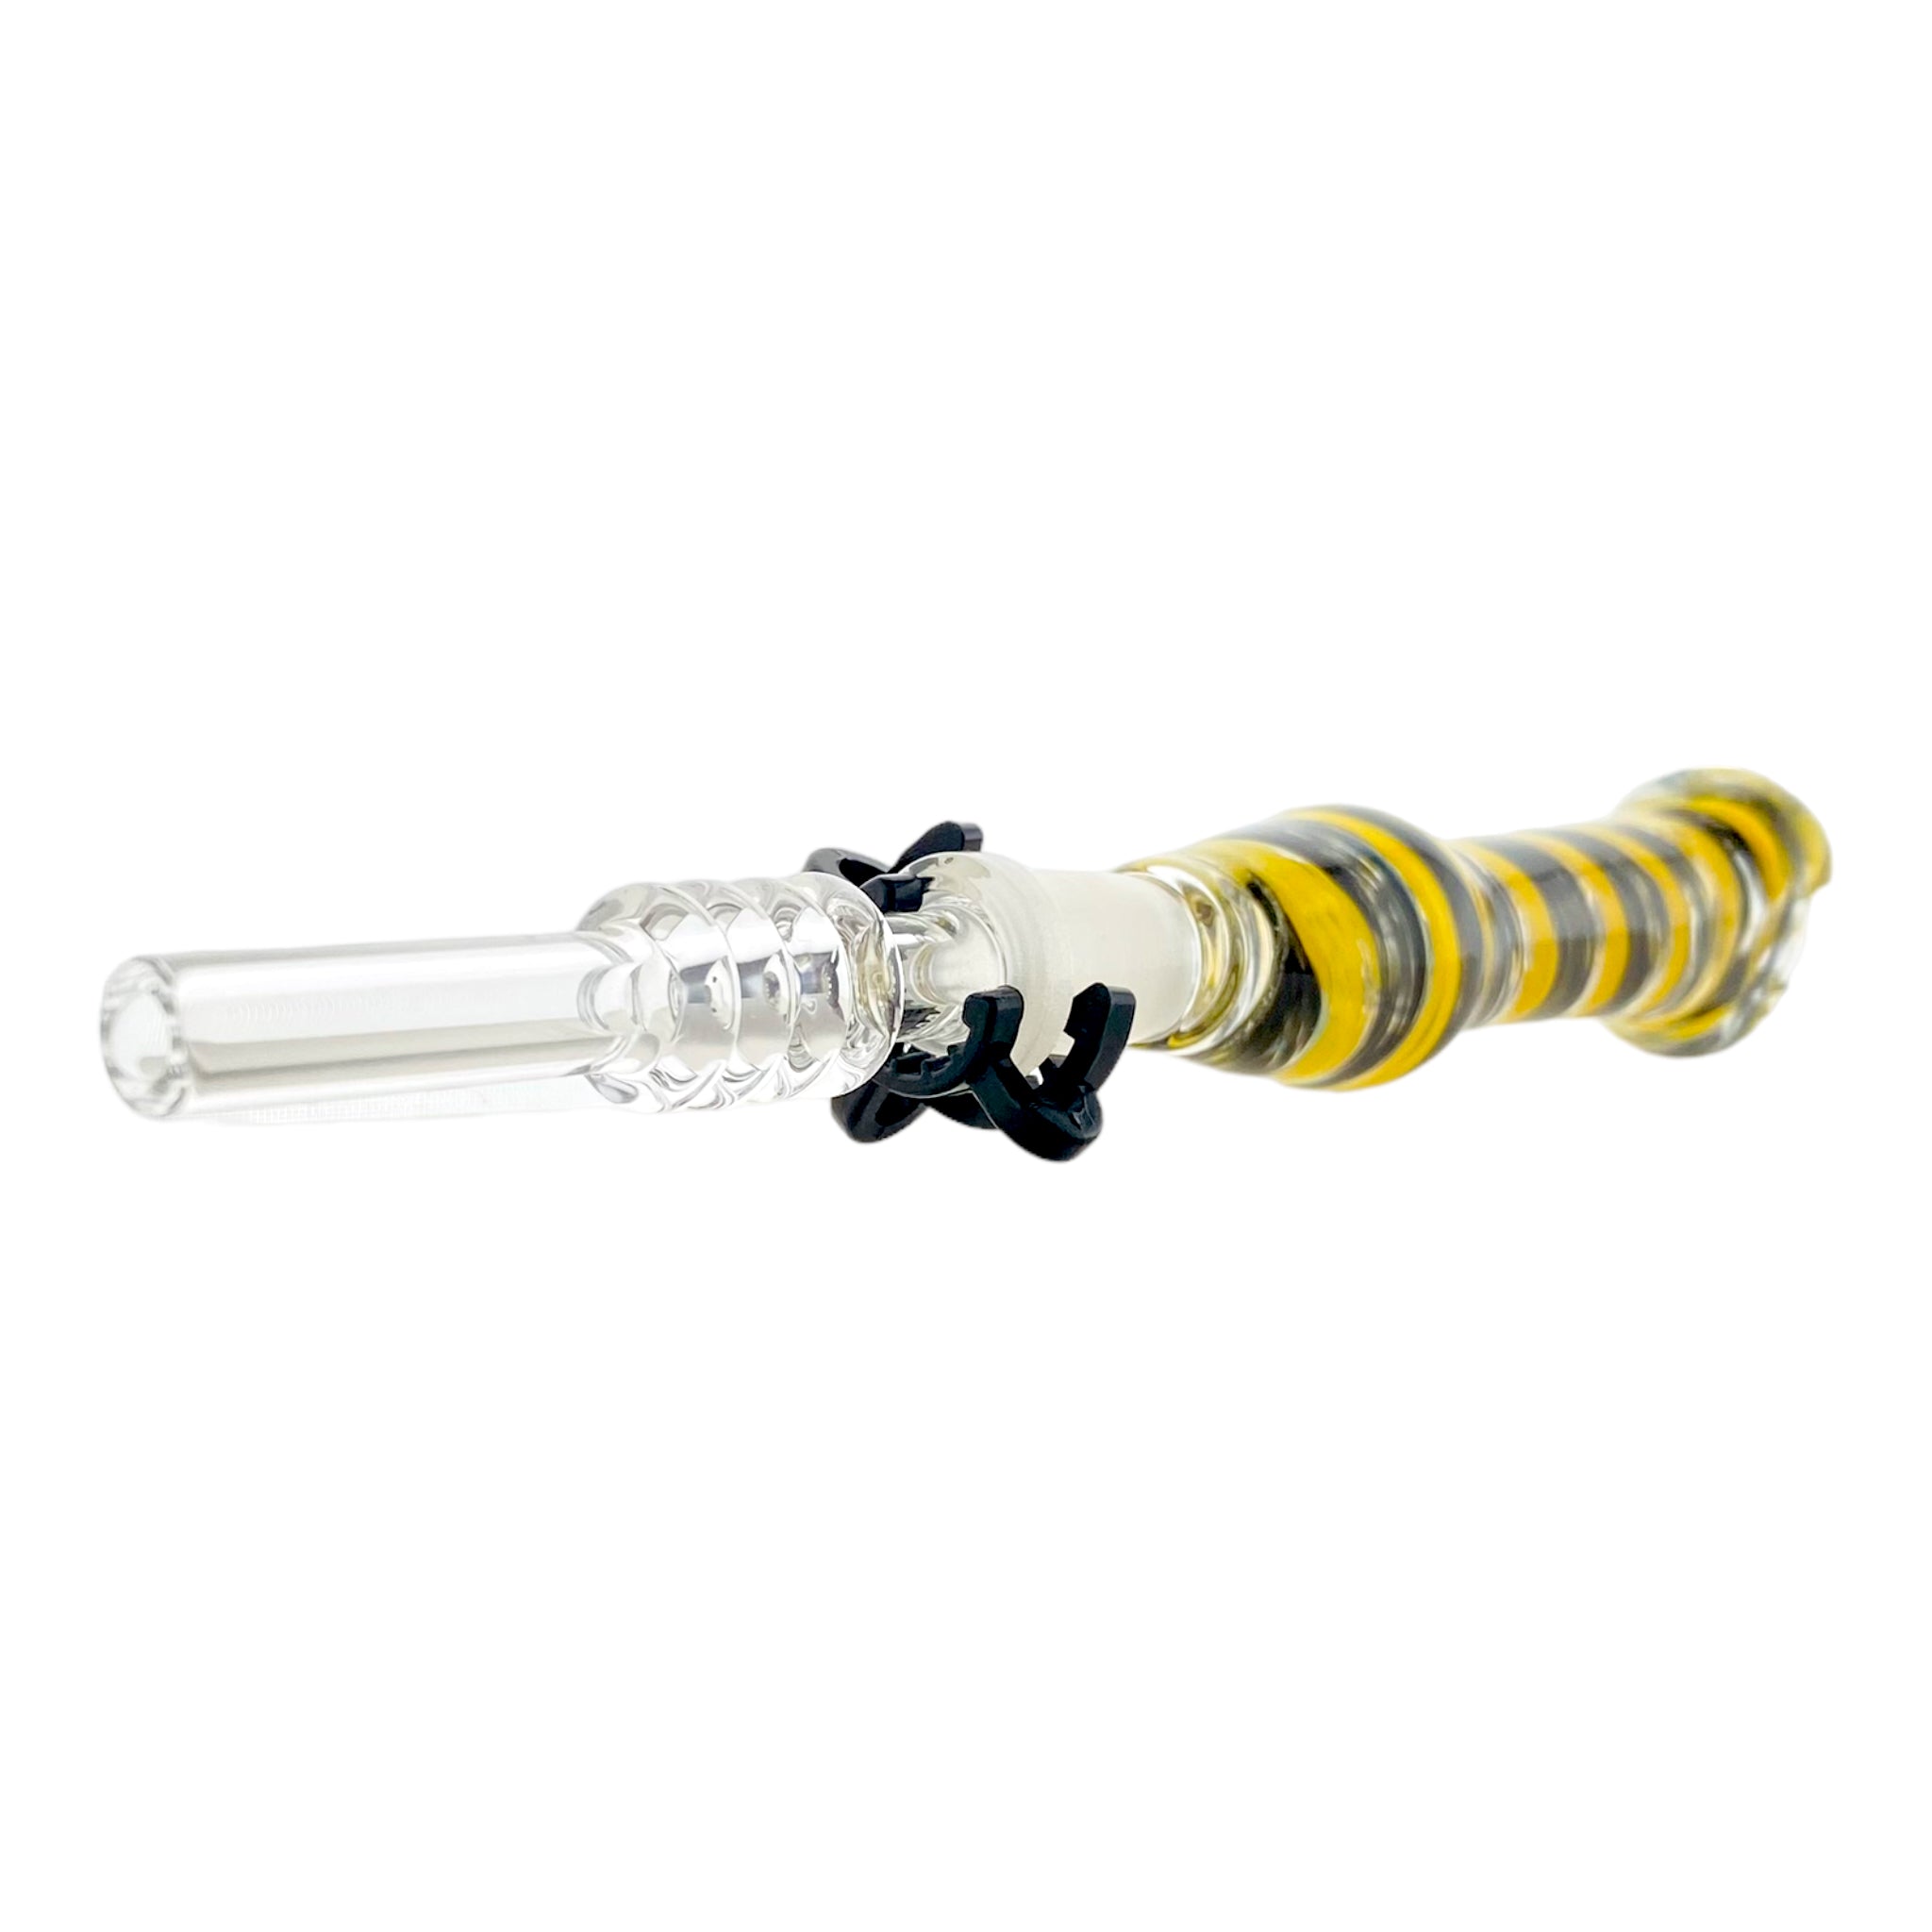 10mm Nectar Collector - Black And Yellow Inside Out With 10mm Quartz Tip